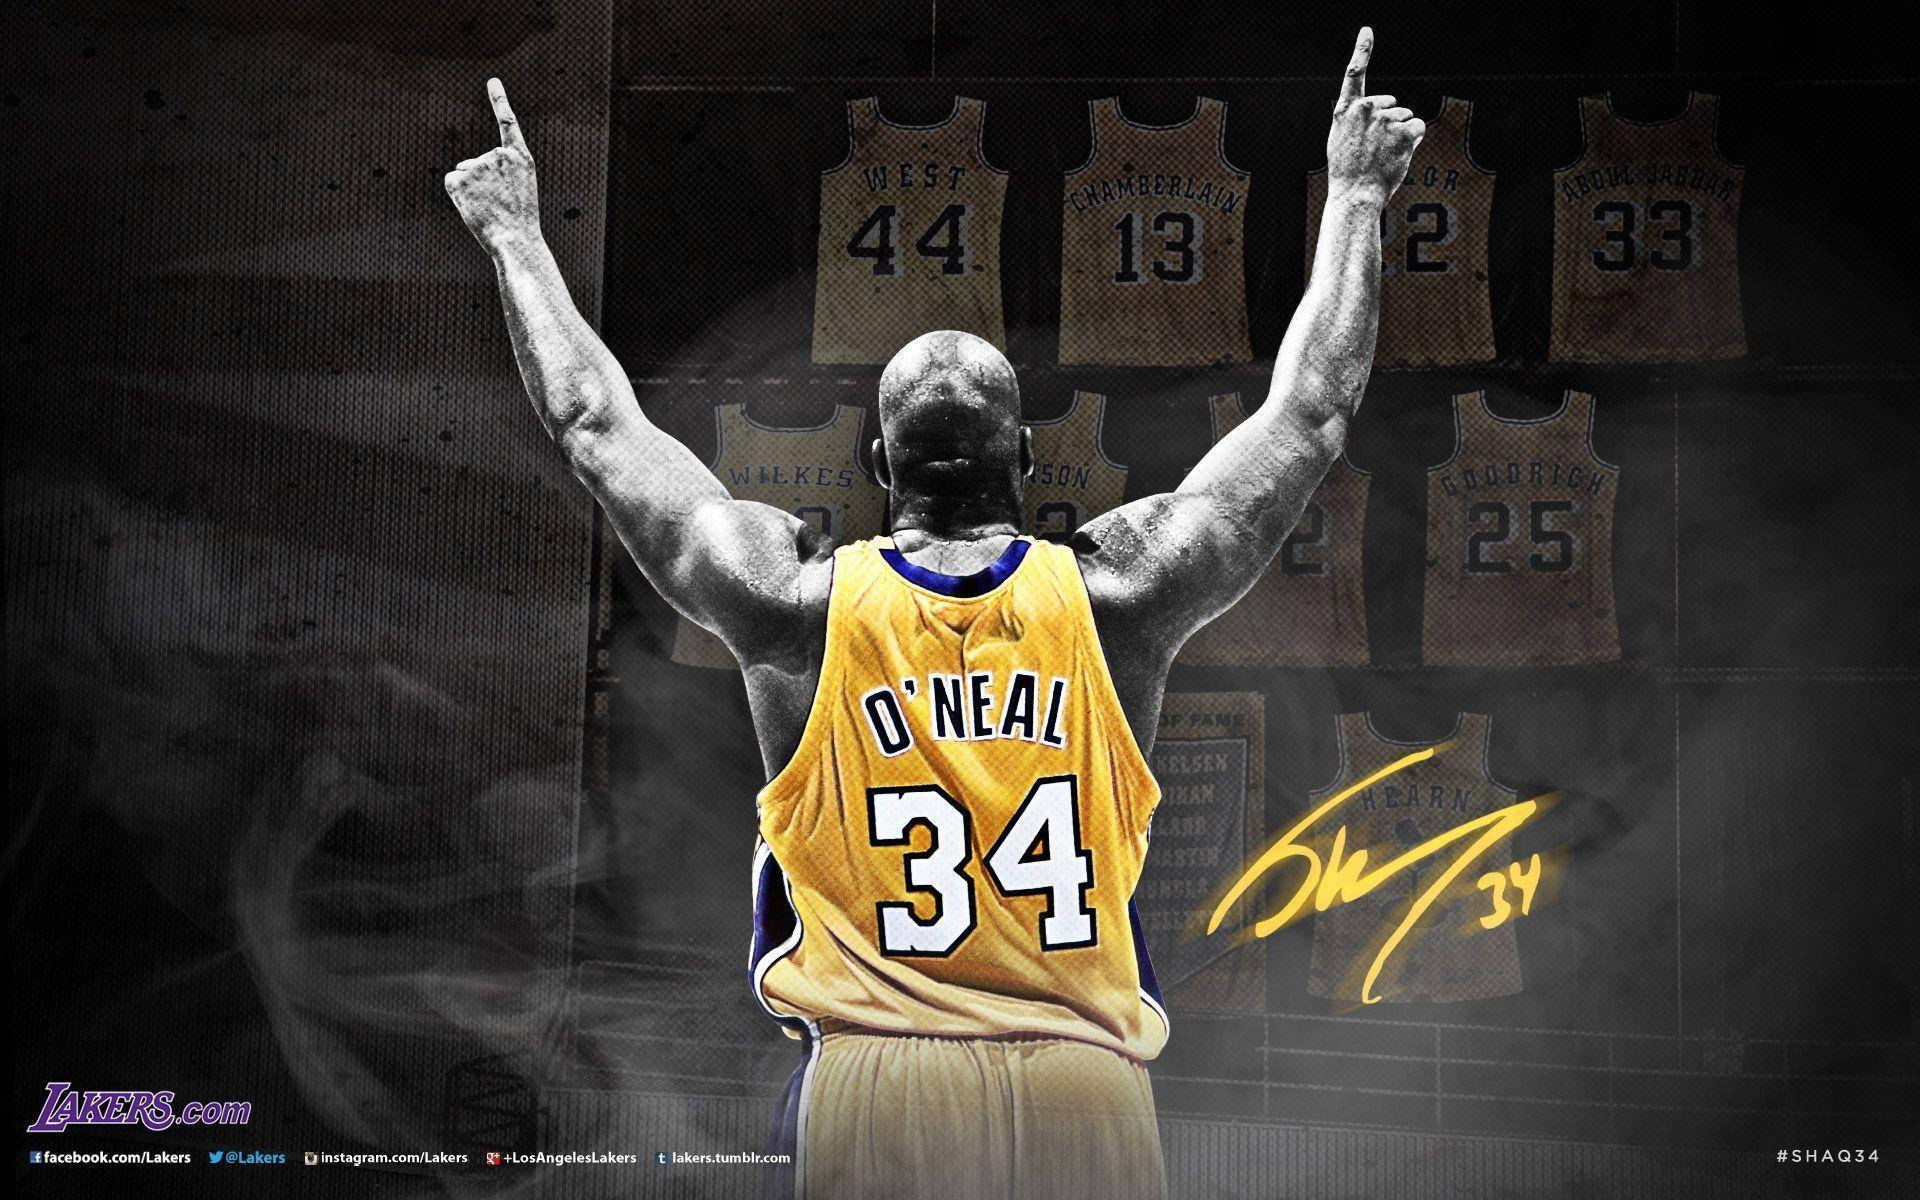 Shaquille O'neal Jersey Number